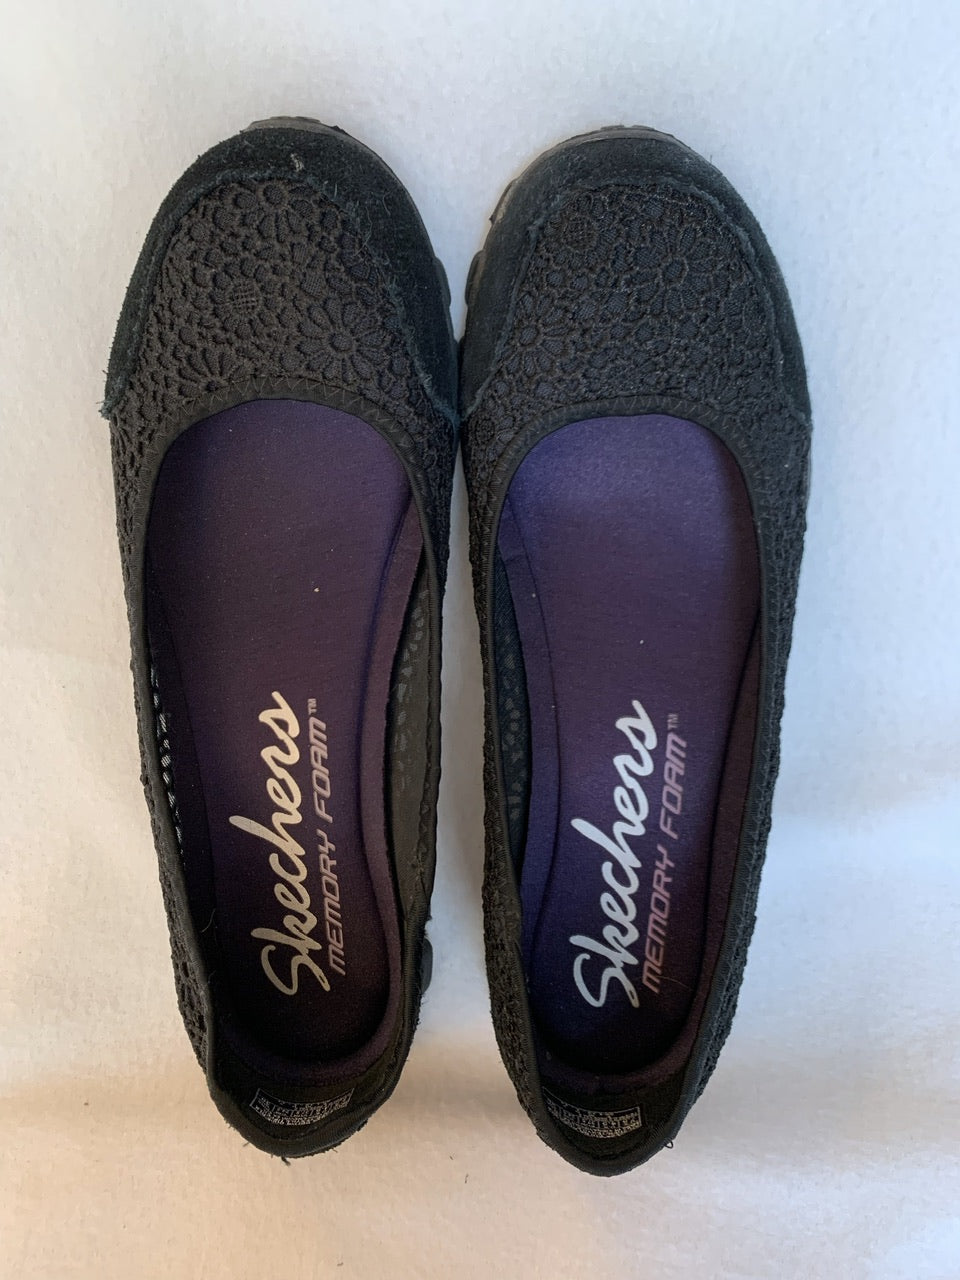 Size 7.5 Women’s Black Skechers Slip On Flats / Shoes with Lace Texture